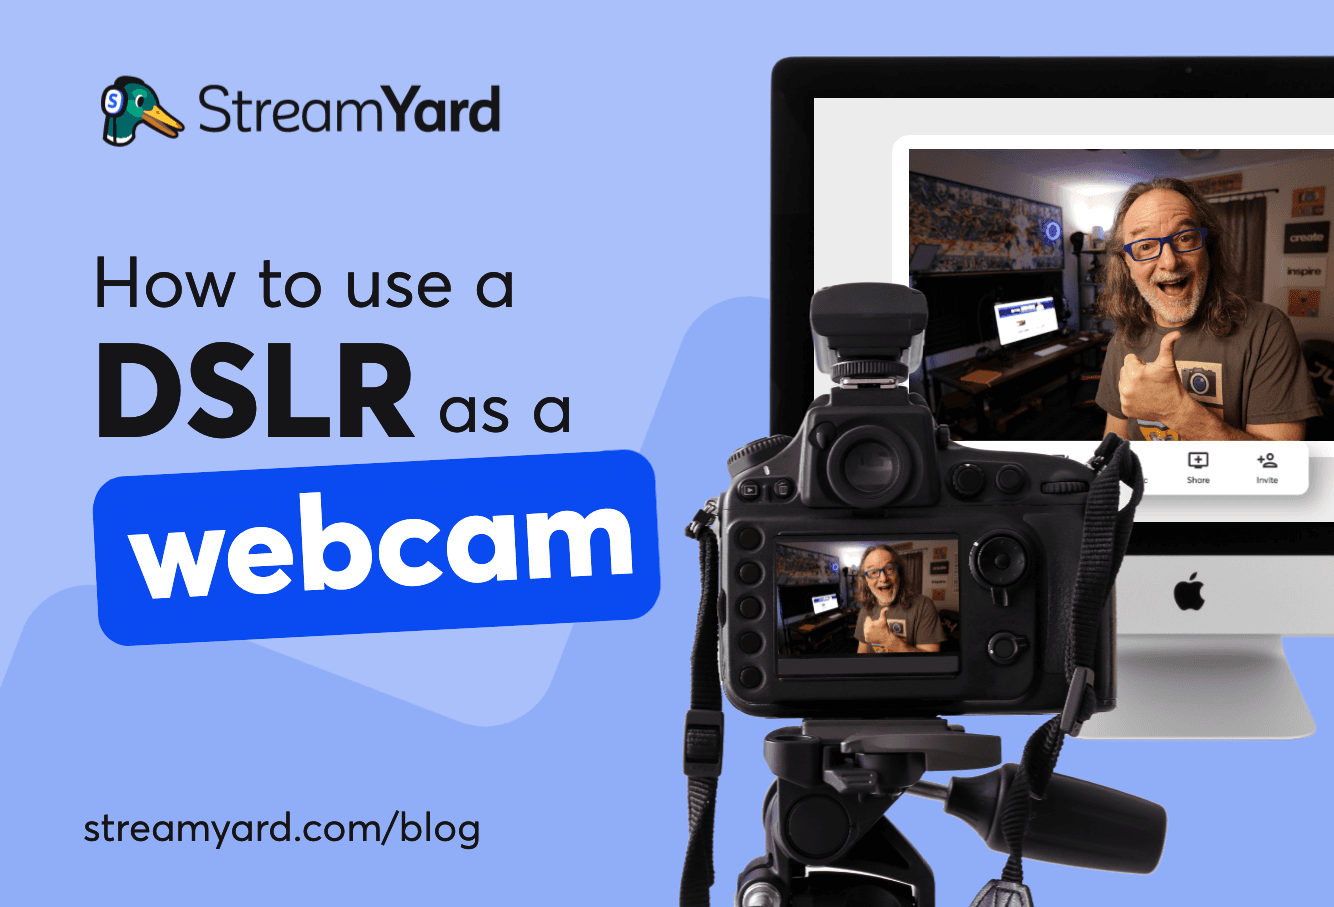 Check out some useful tips on how to use DSLR as a webcam and make the most of live streams with better production quality.